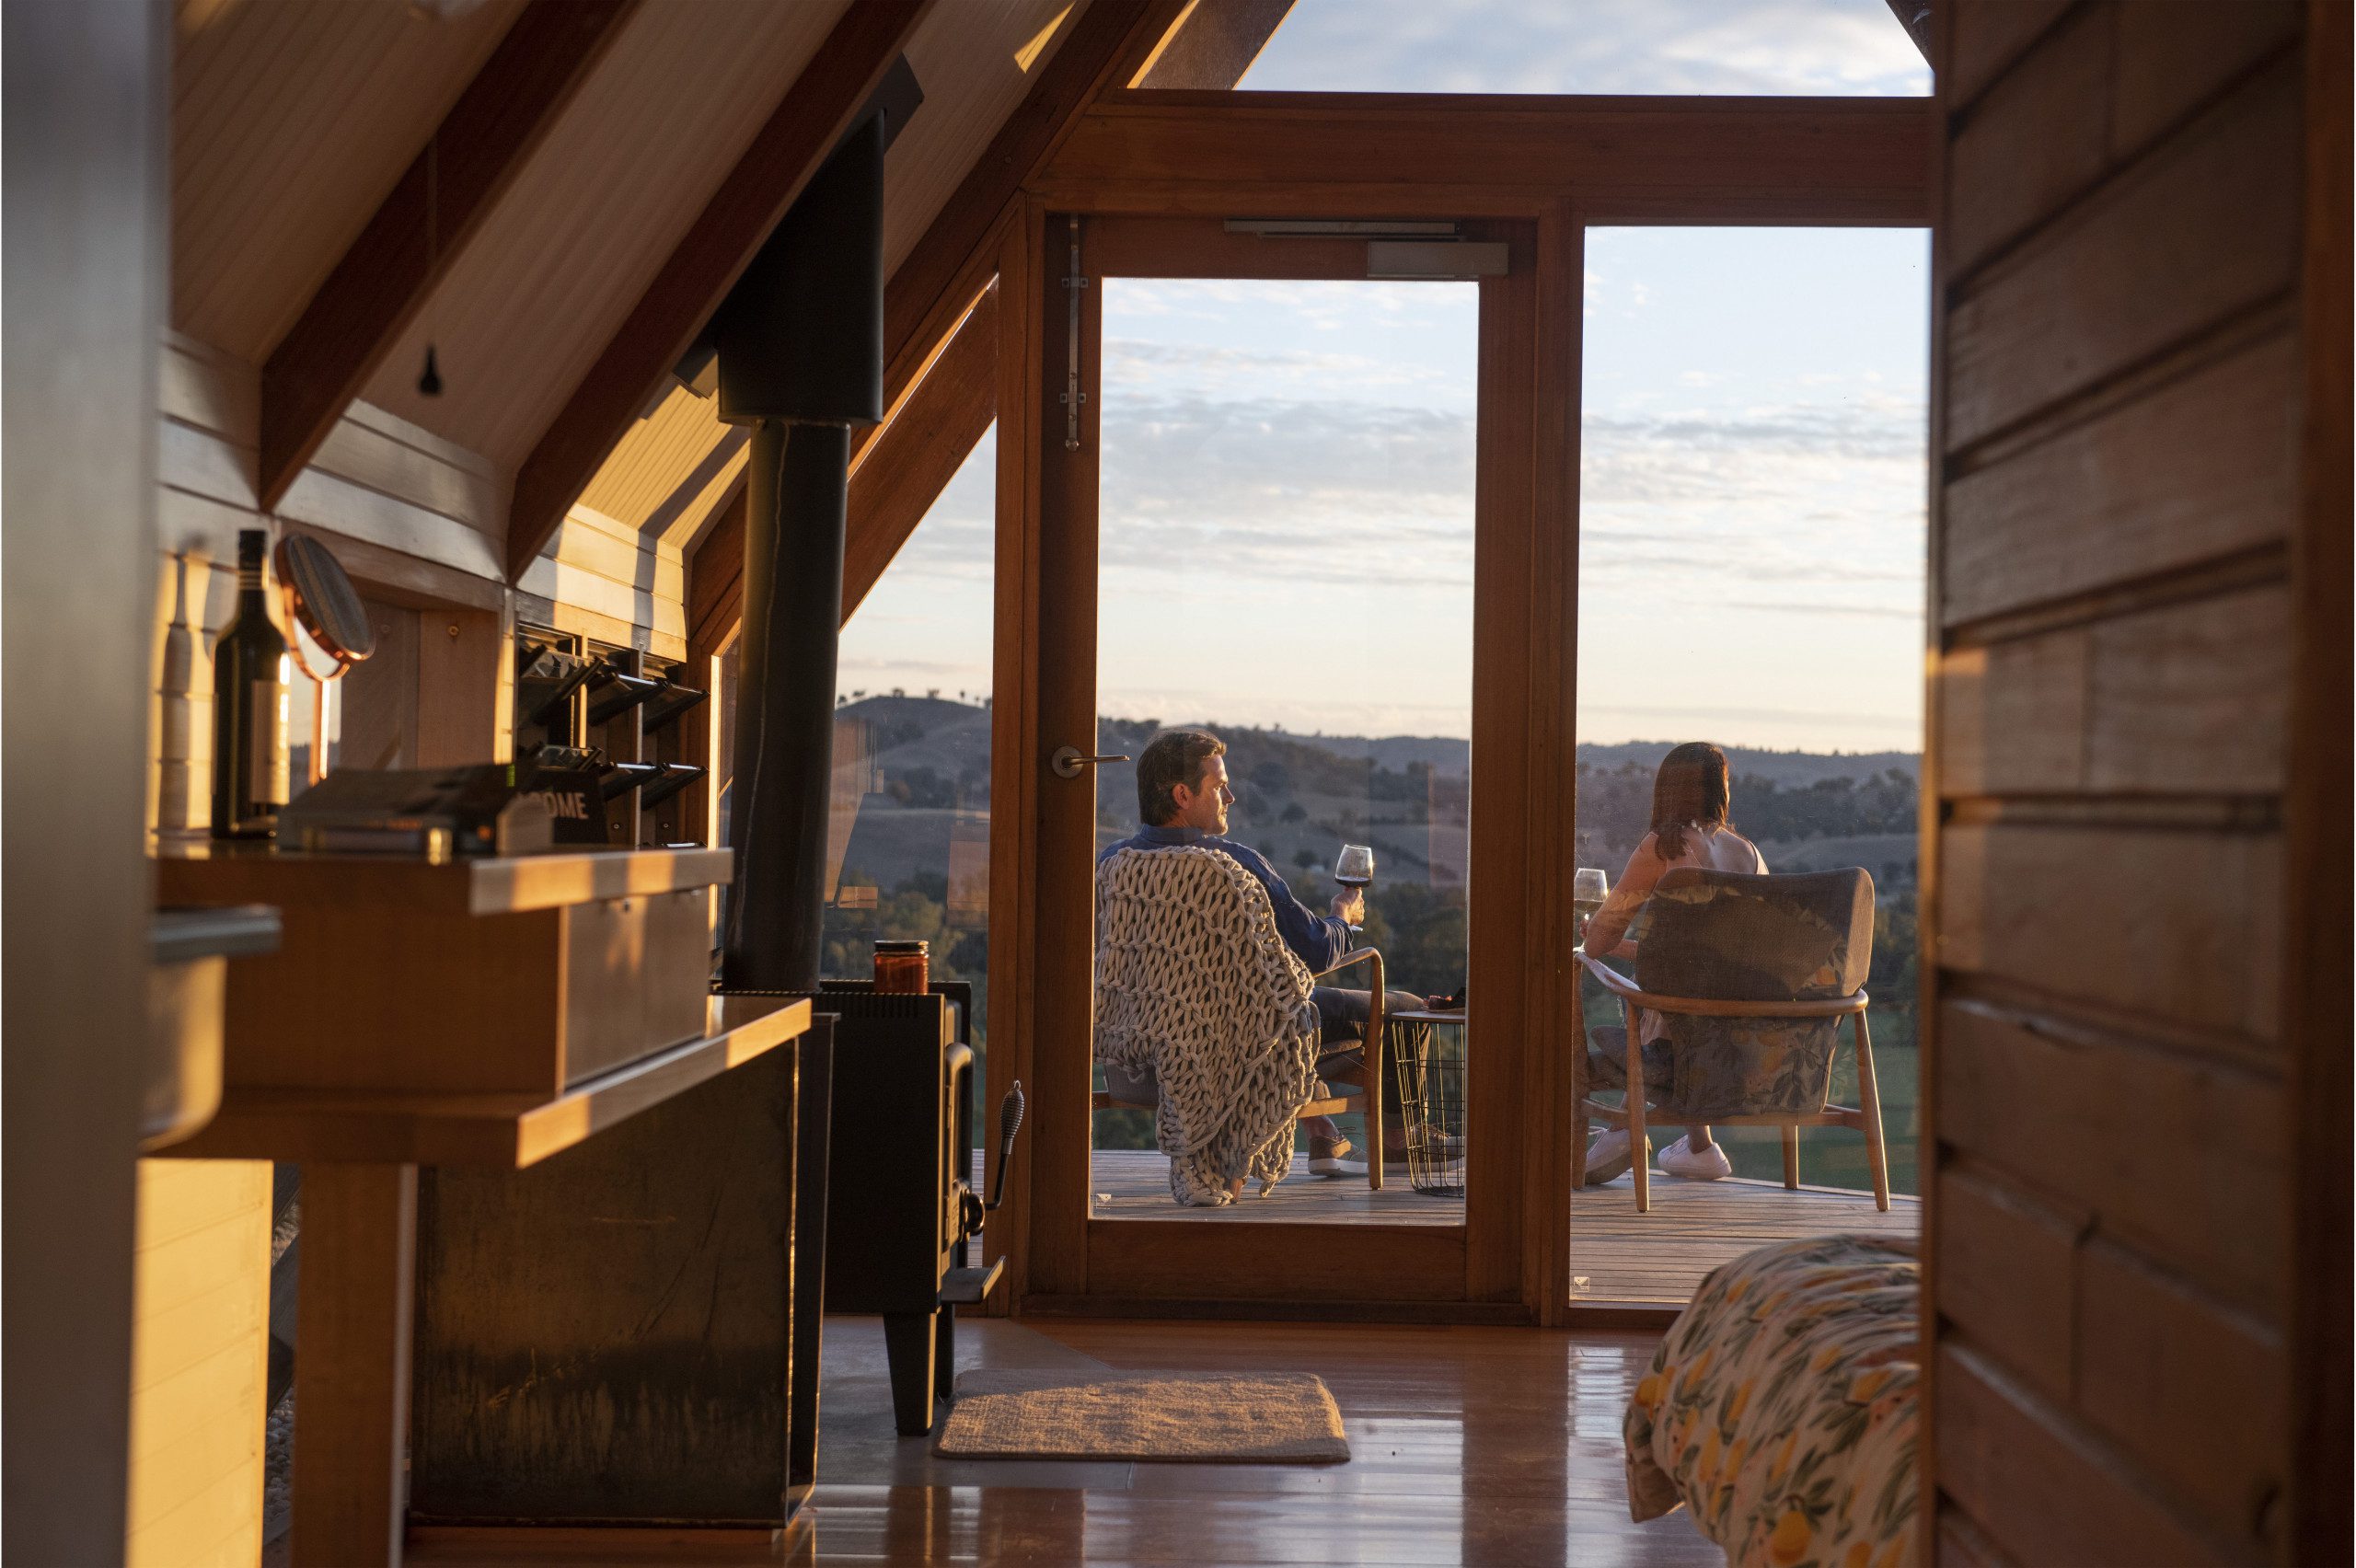 A couple in the accommodation enjoying a wine and the beautiful view in the evening light, nearly sunset